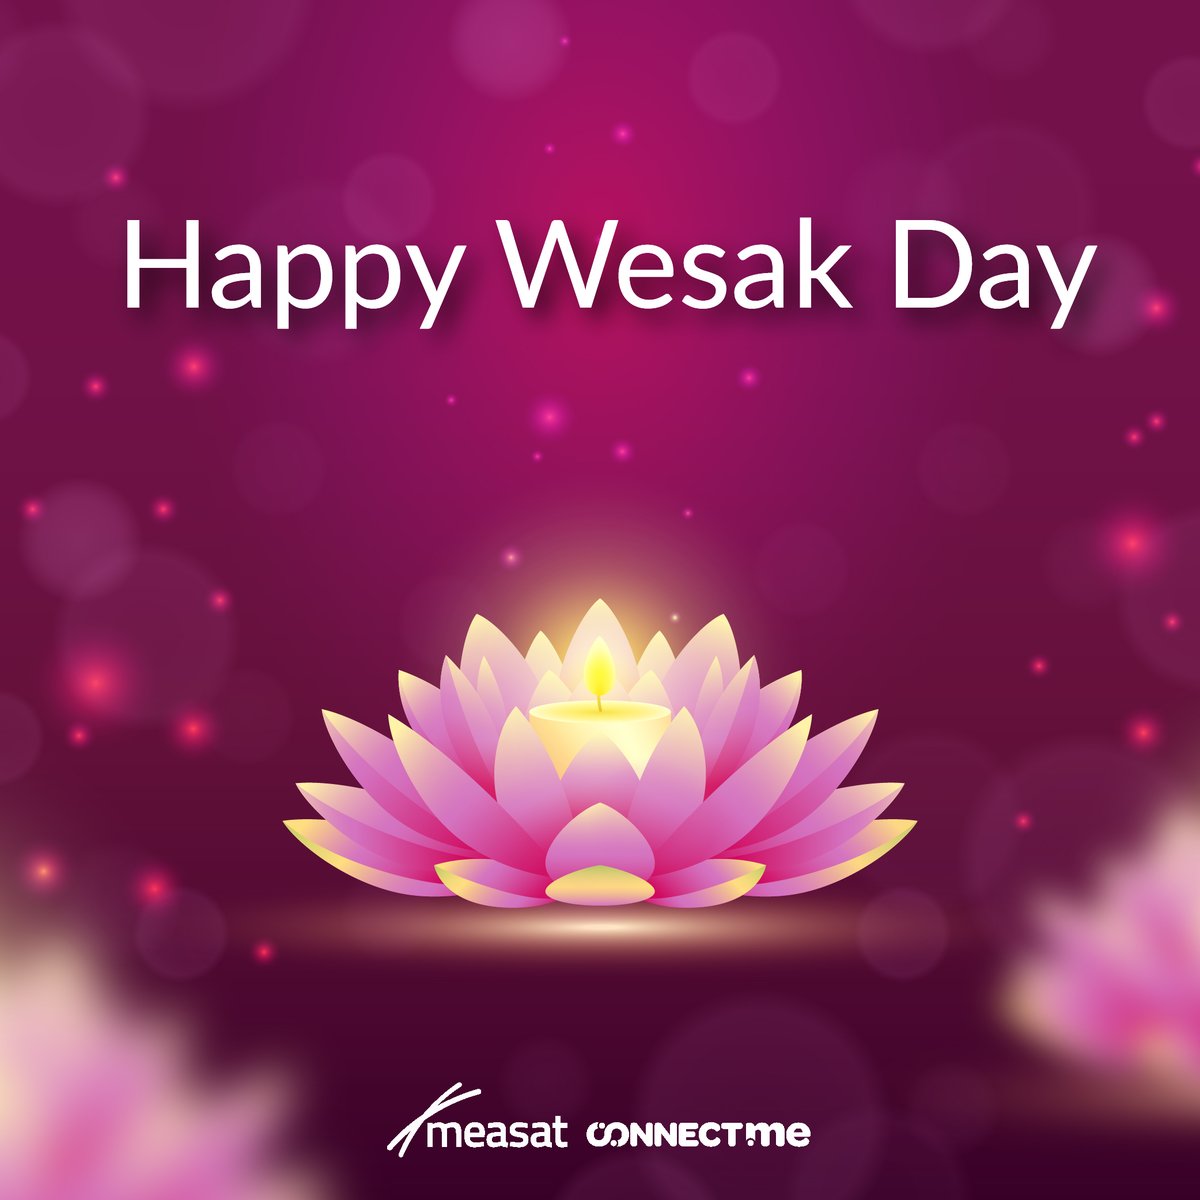 Happy Wesak Day to everyone observing this festival! May your day be filled with peace, joy, and enlightenment. Best wishes from #MEASAT and #CONNECTme